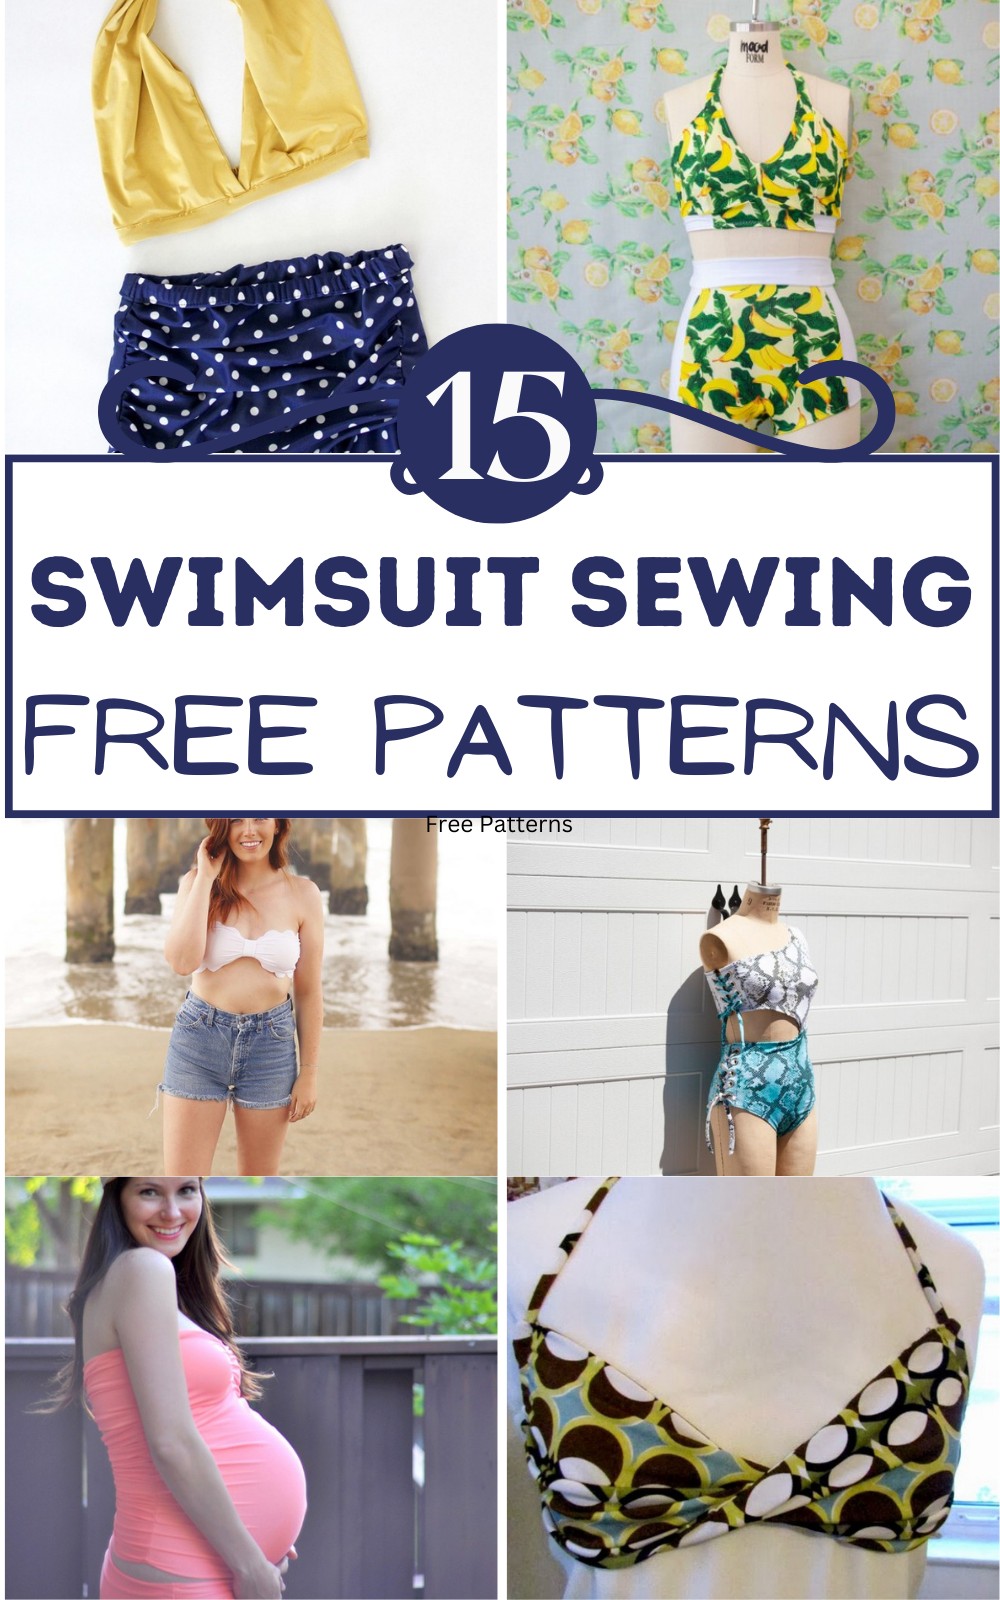 15 Free Swimsuit Sewing Patterns - Craftsy